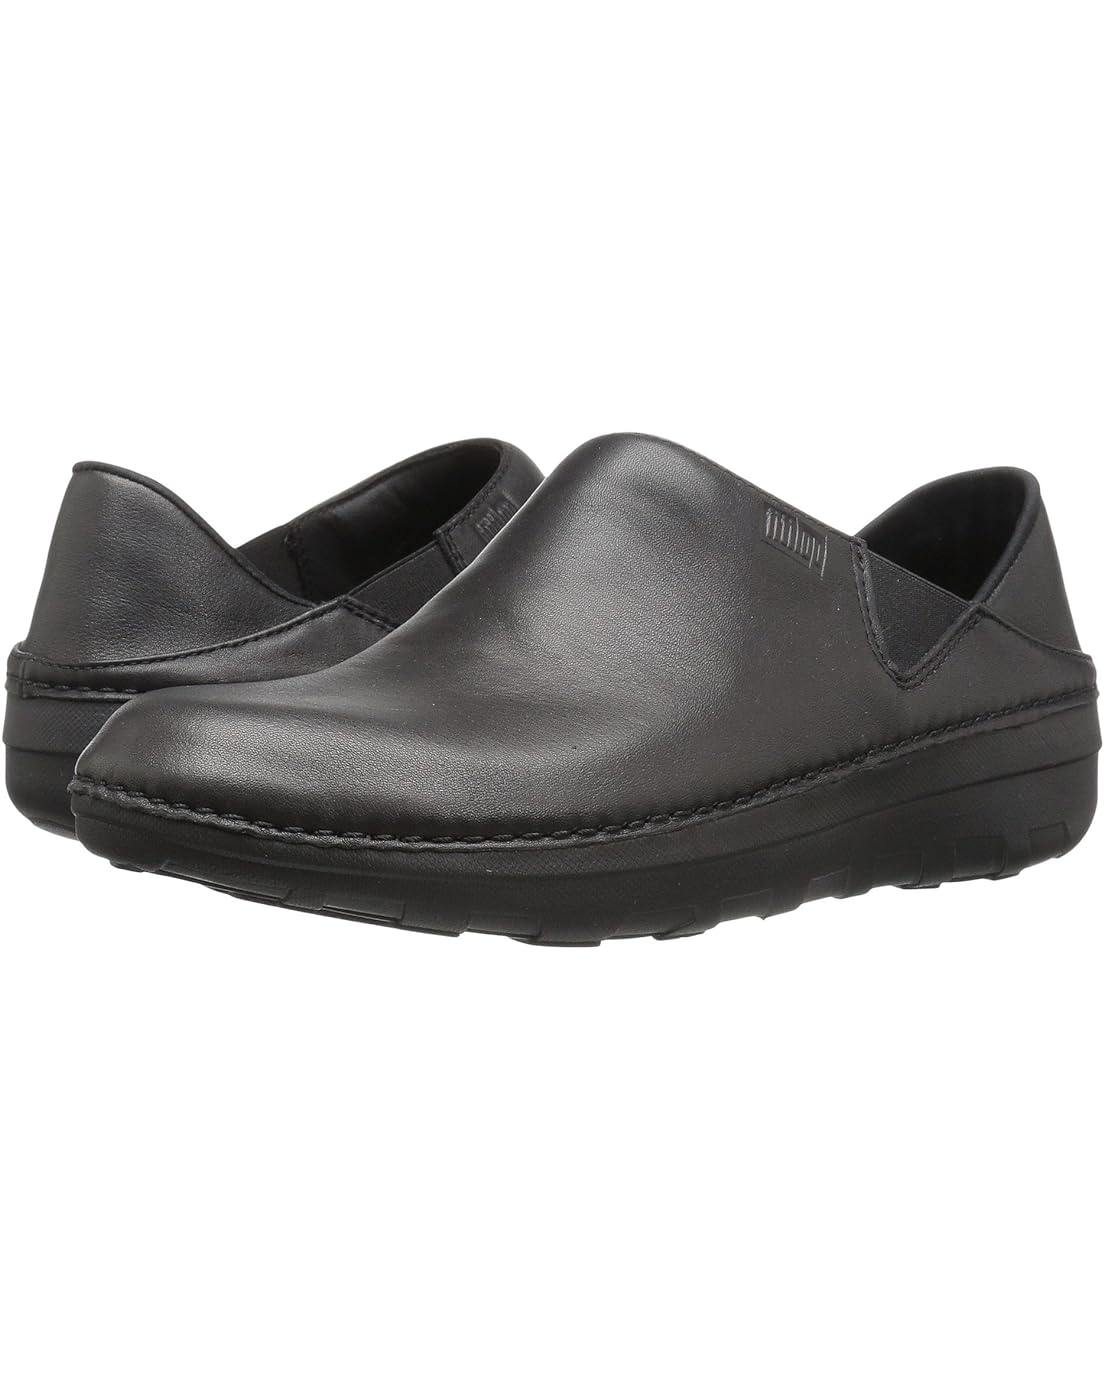 FitFlop Superloafer Leather